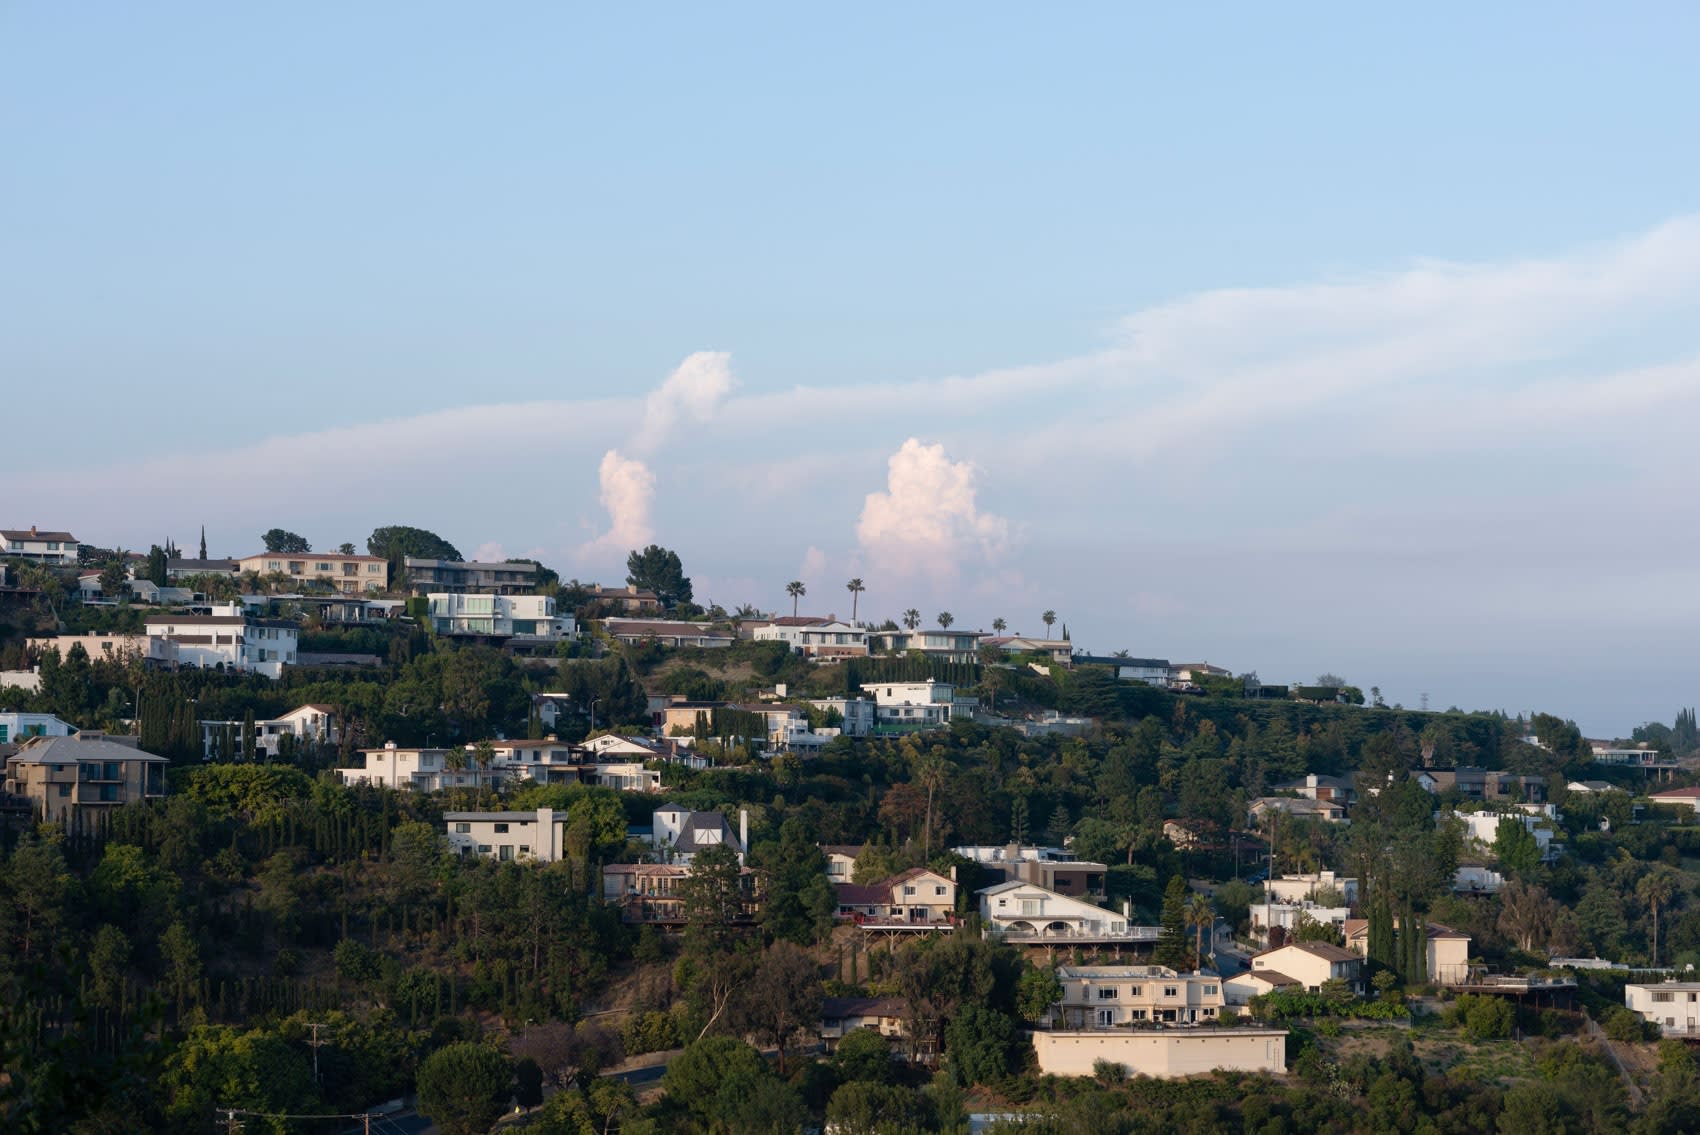 The green hollywood hills—sky is mostly blue with some light clouds, foliage is dark green, hiding the homes on the wall